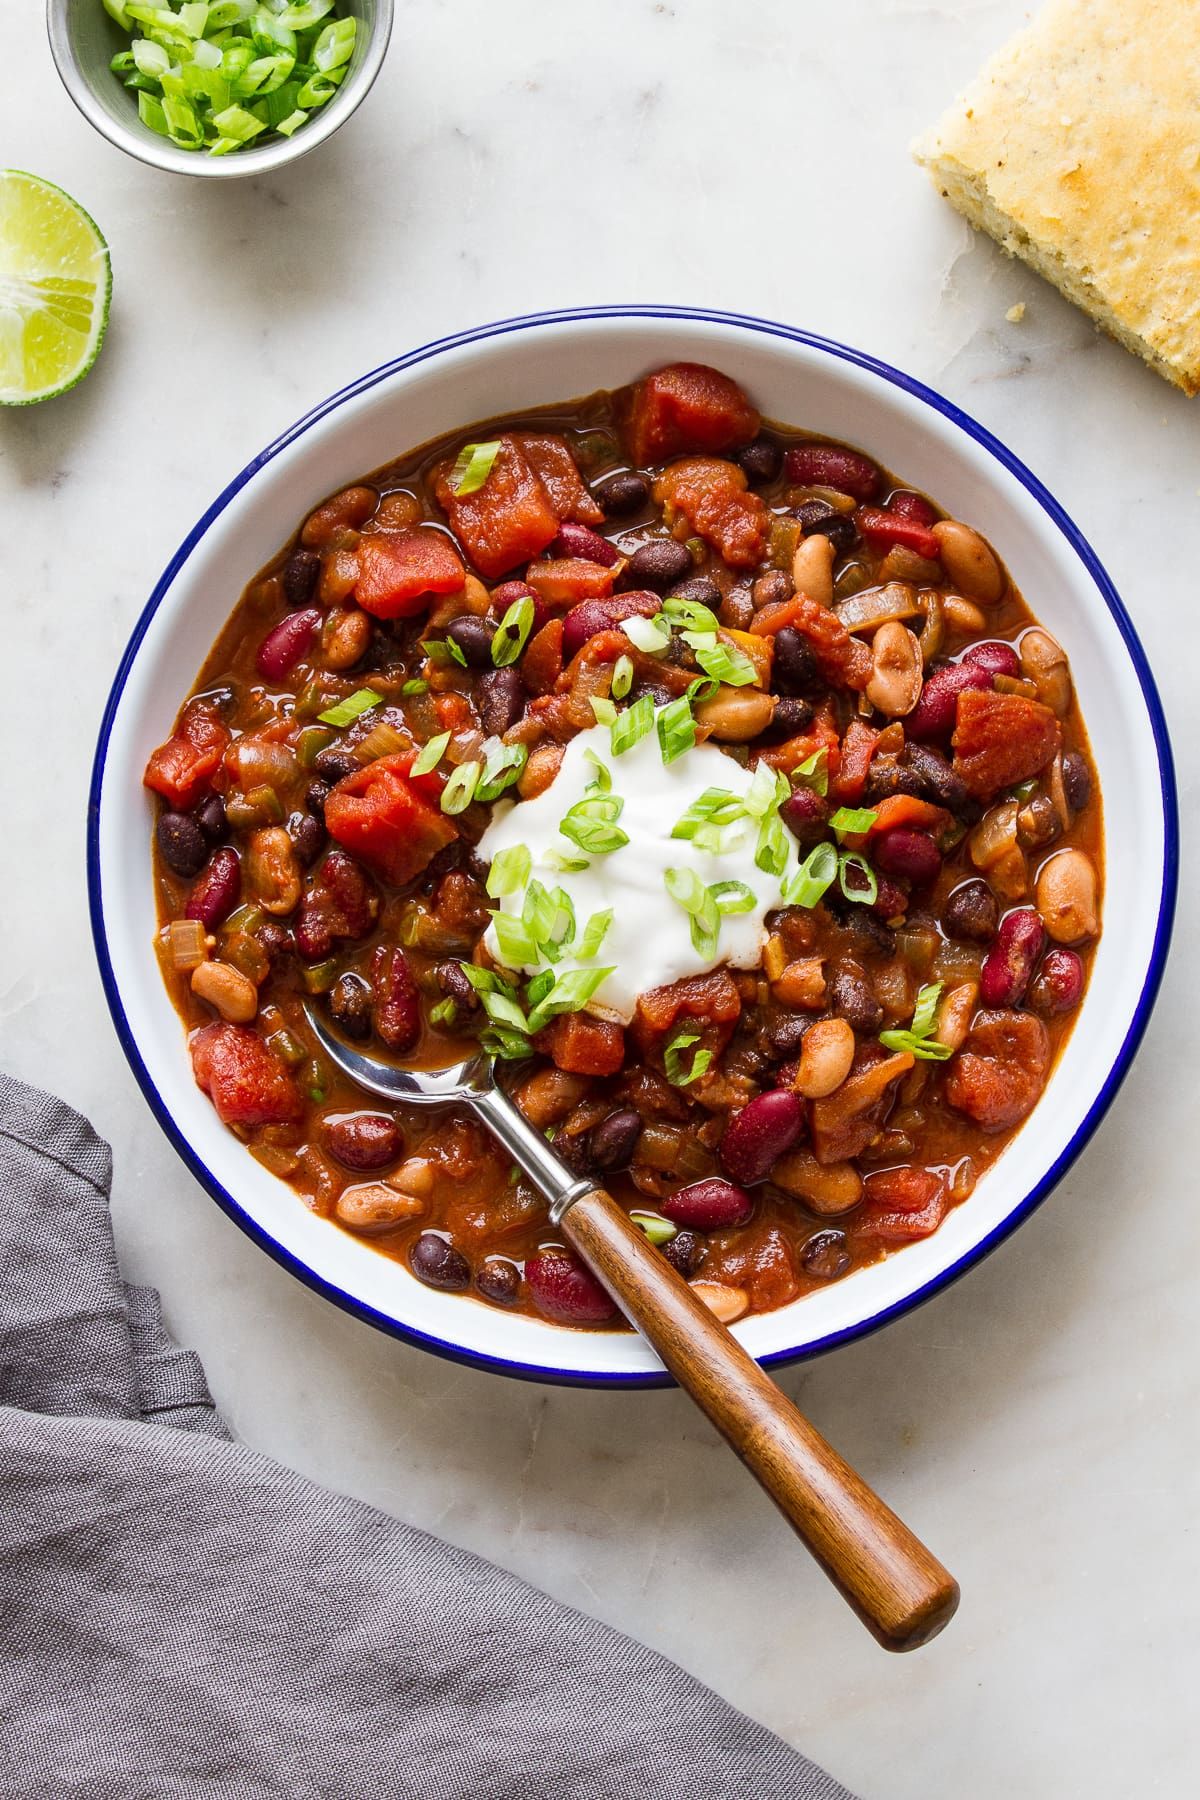 Three Bean Chili in a white bowl with blue edges and a spoon.